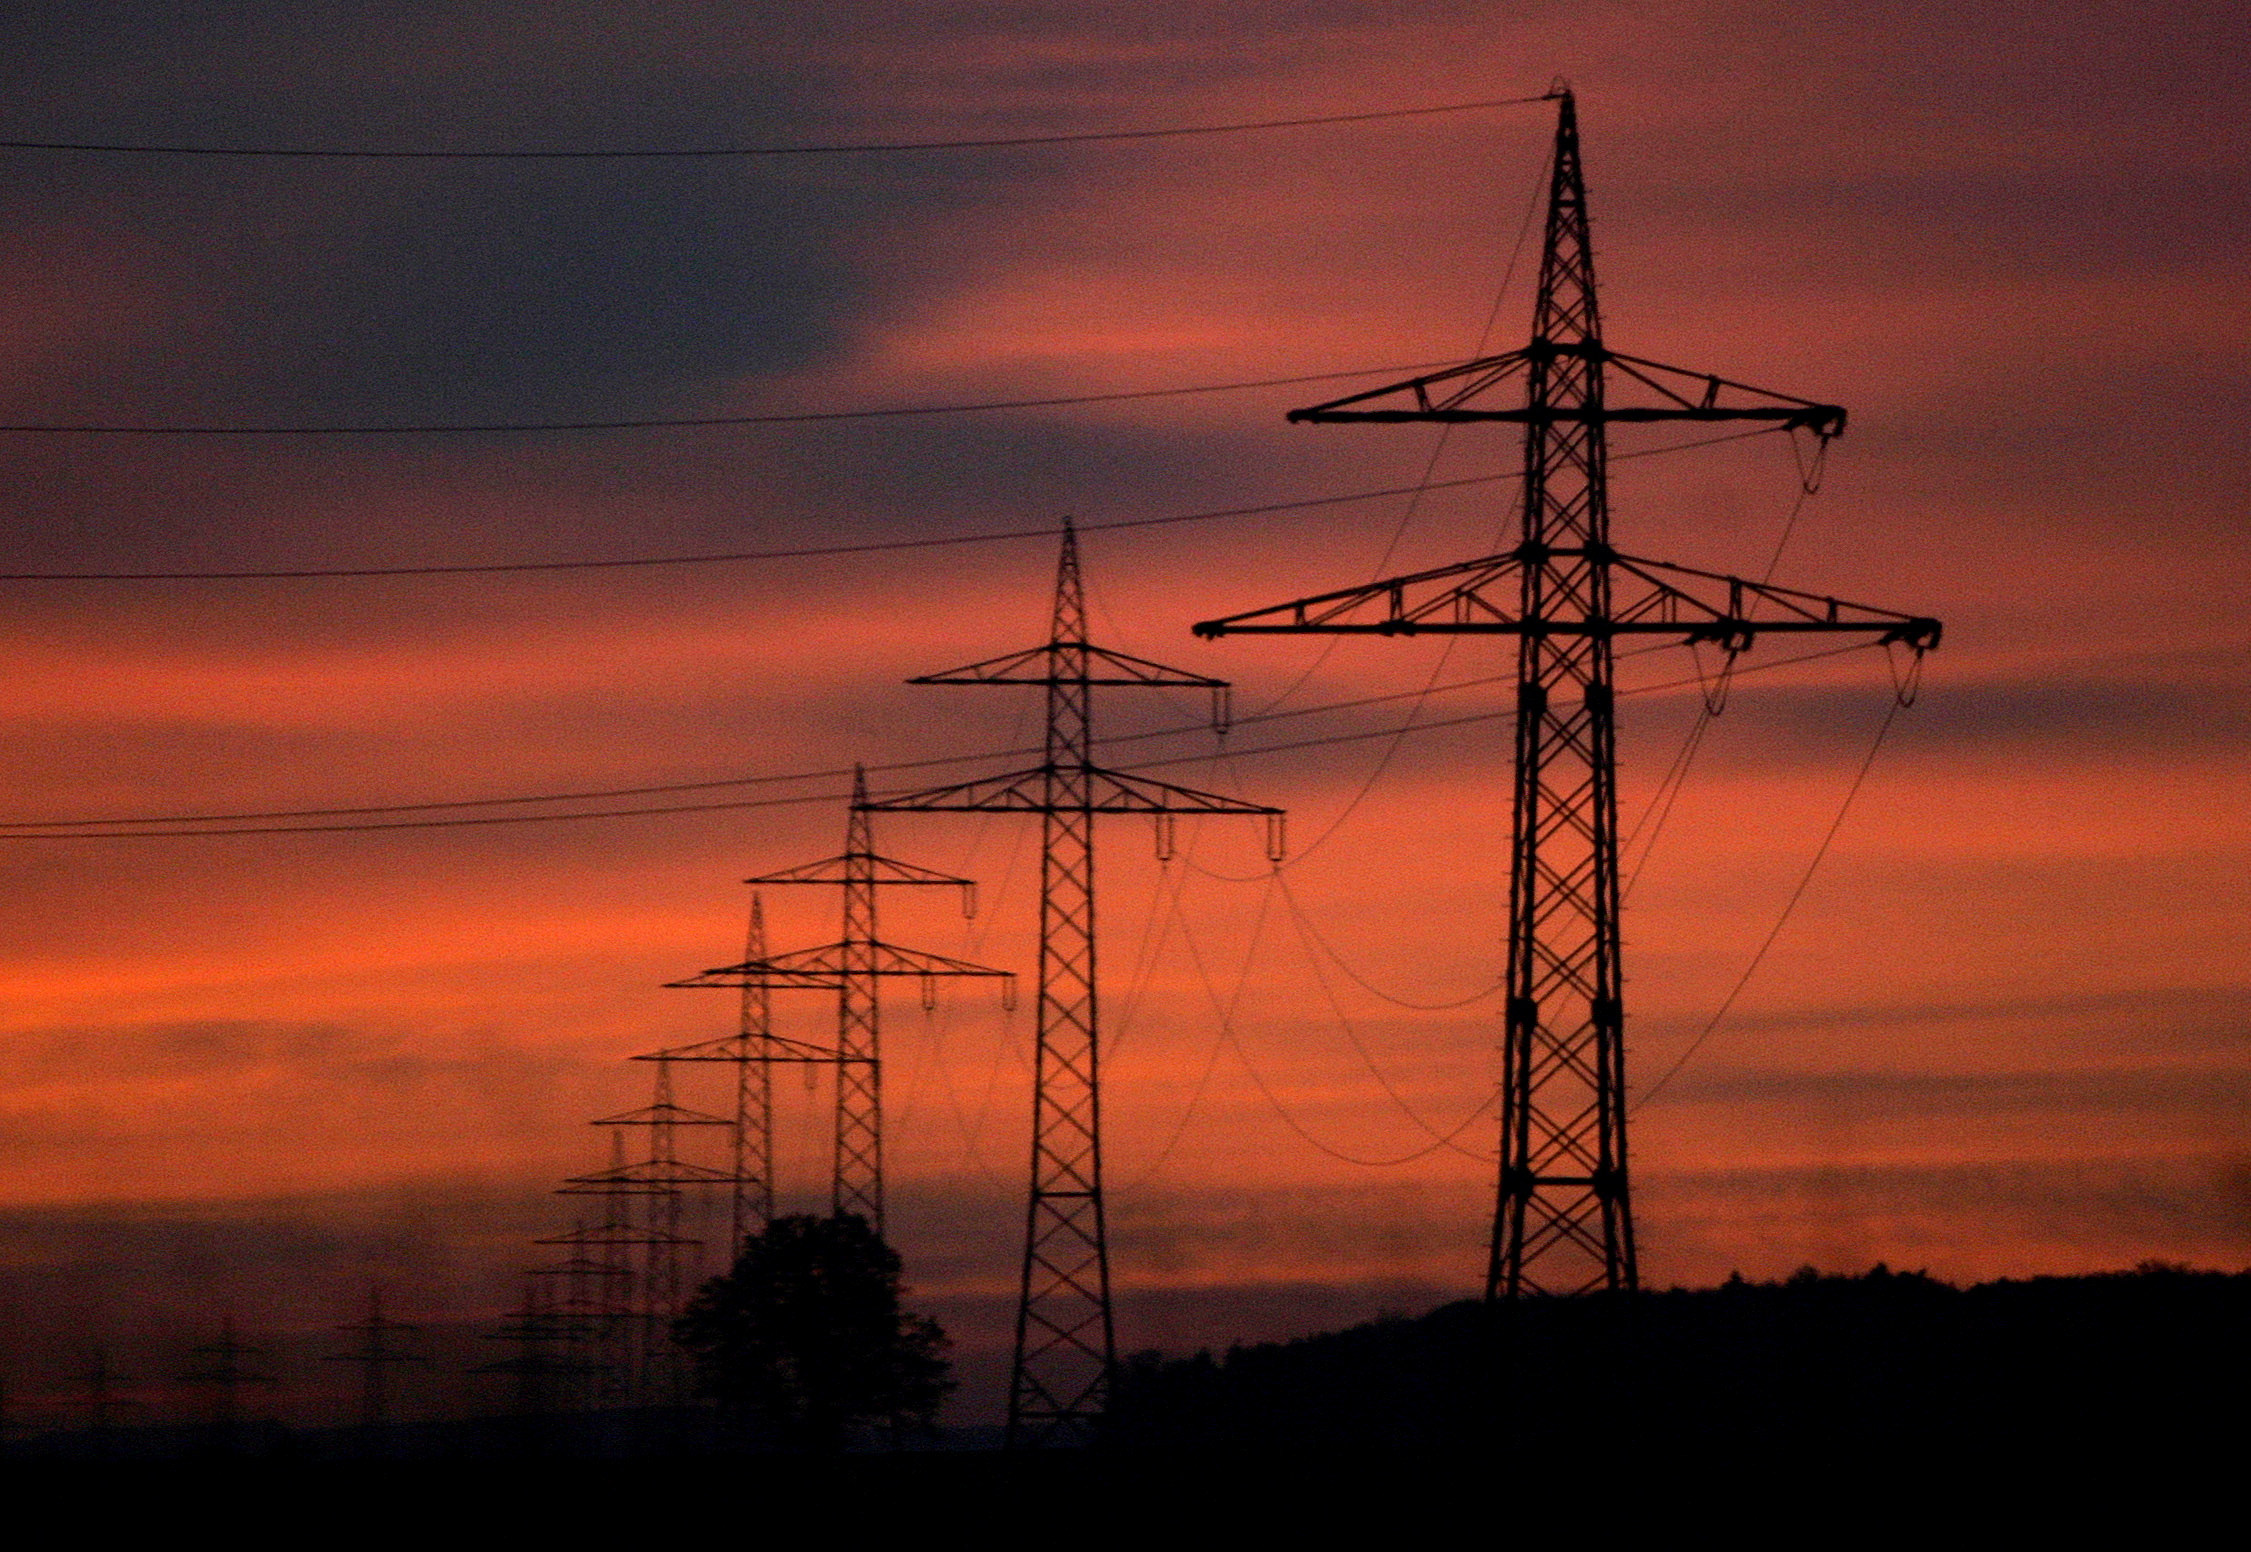 High-voltage power lines are seen during sunset near Ulm